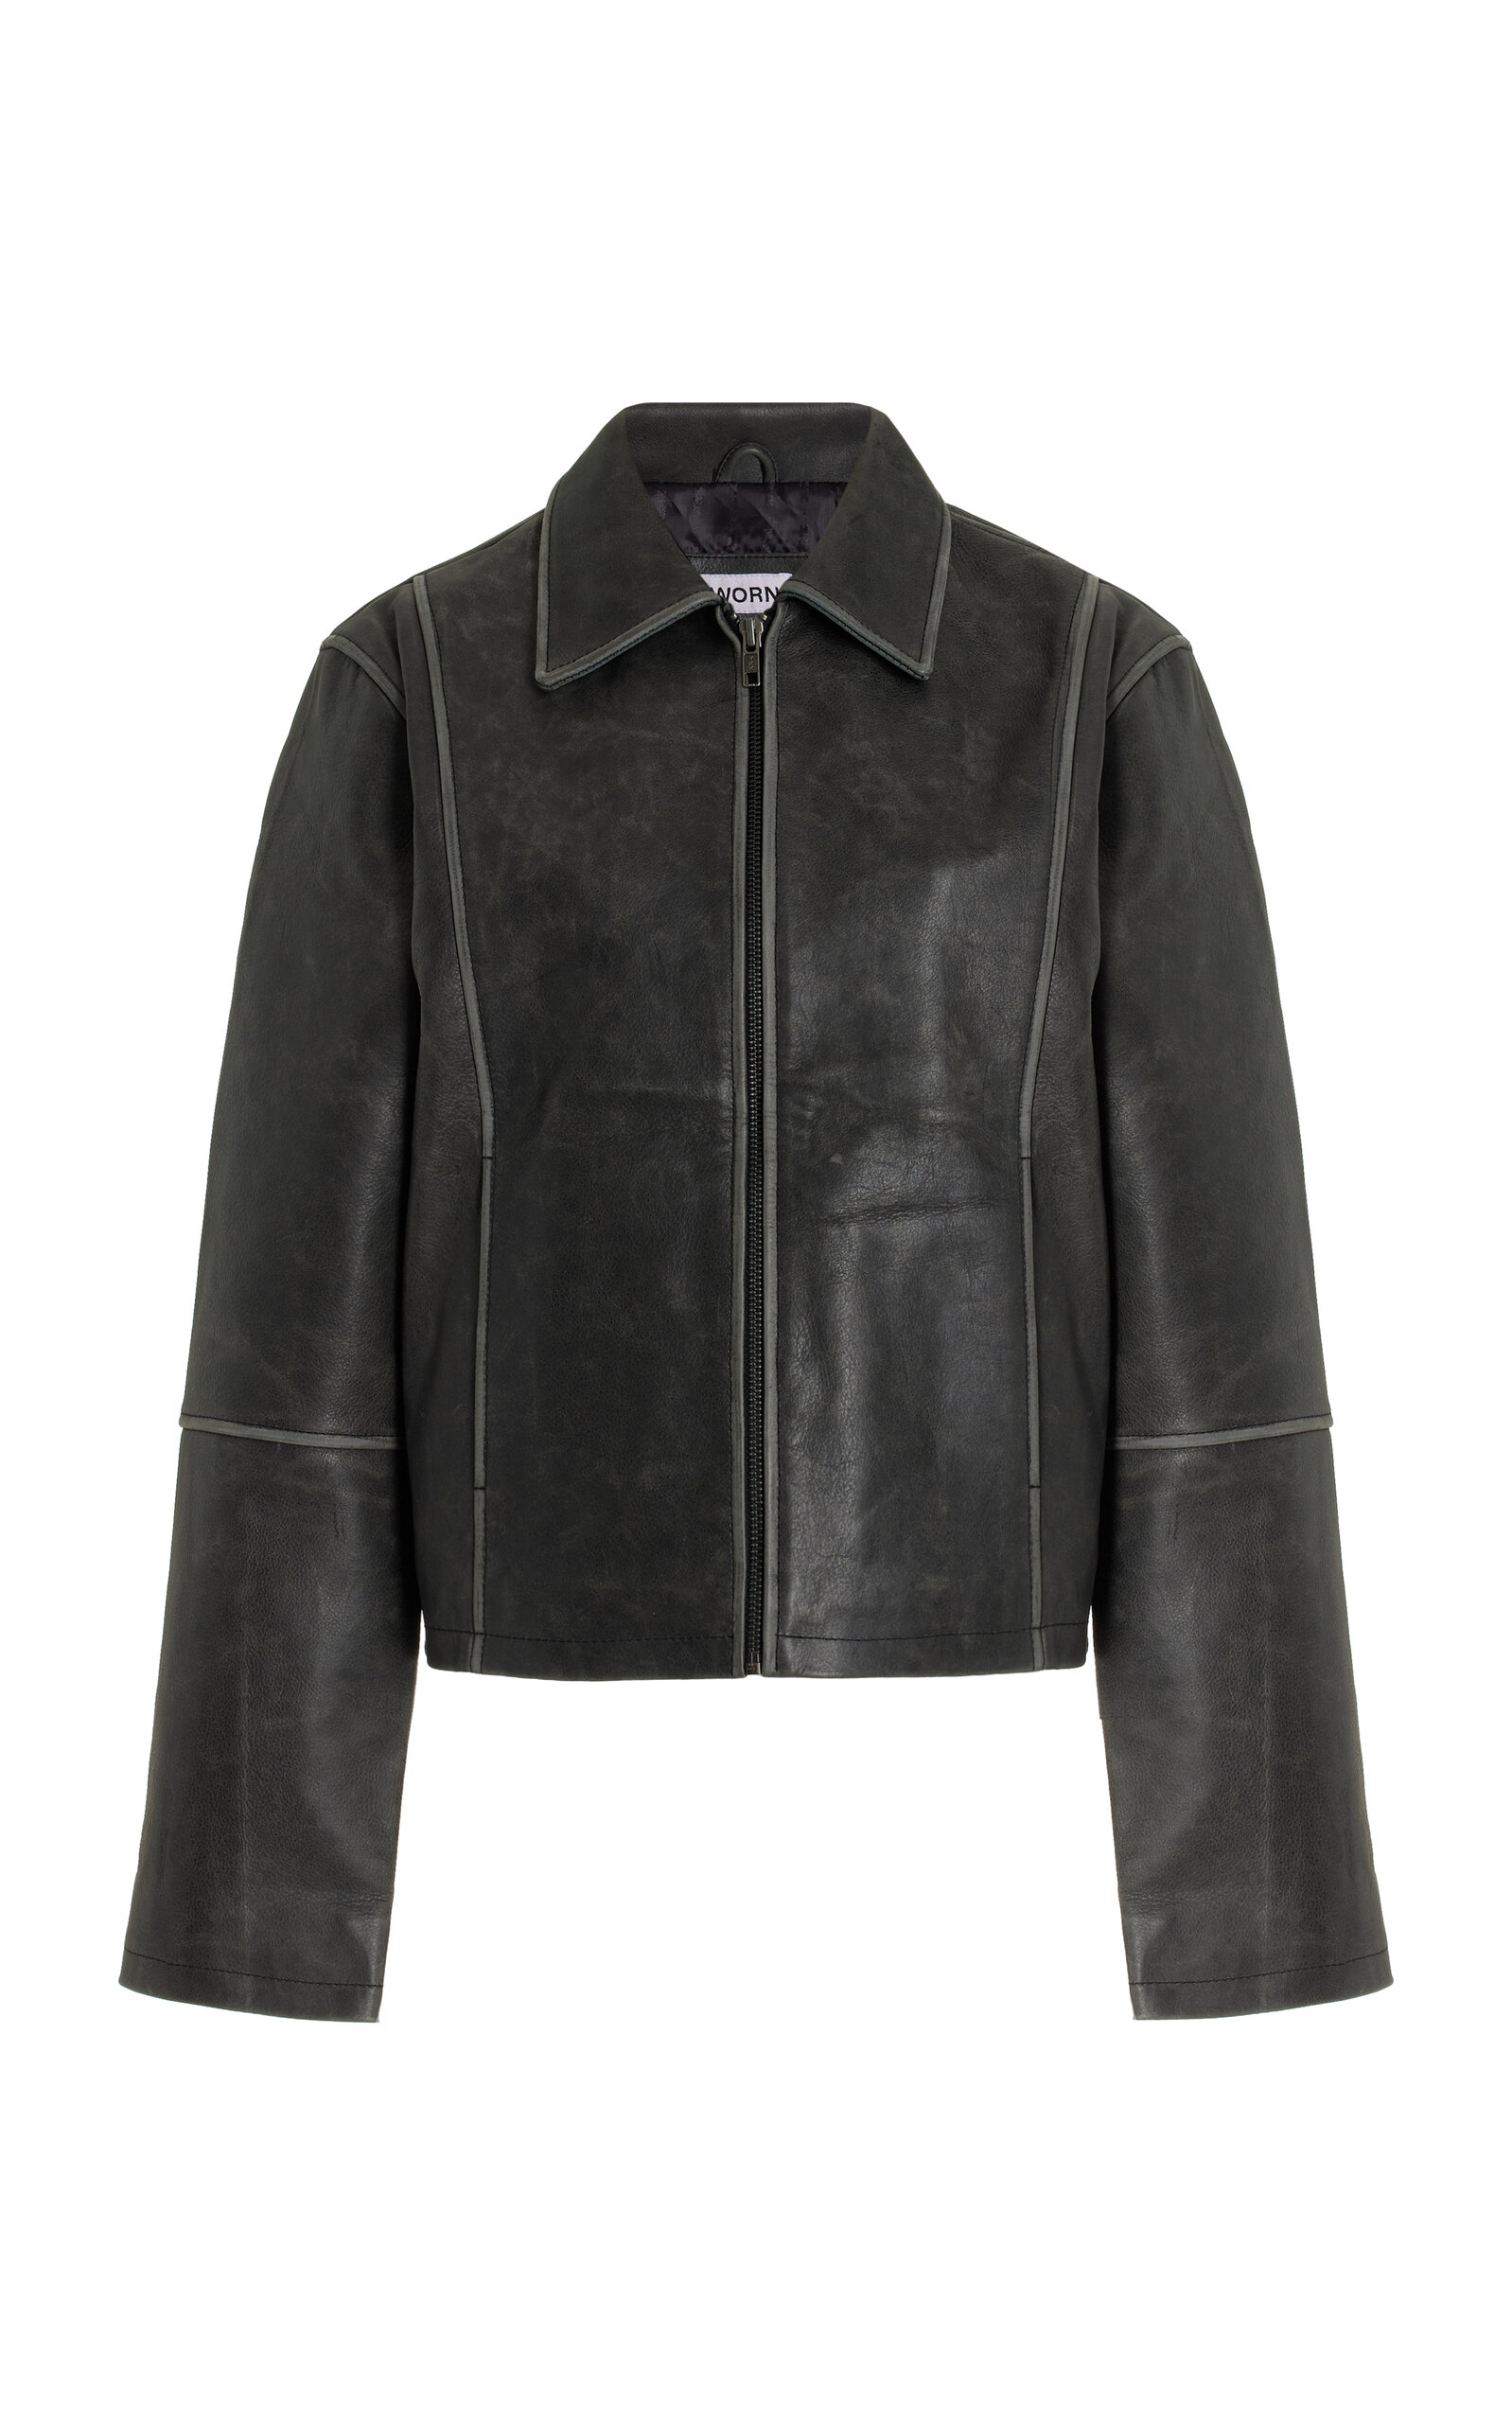 Willow Distressed Leather Jacket